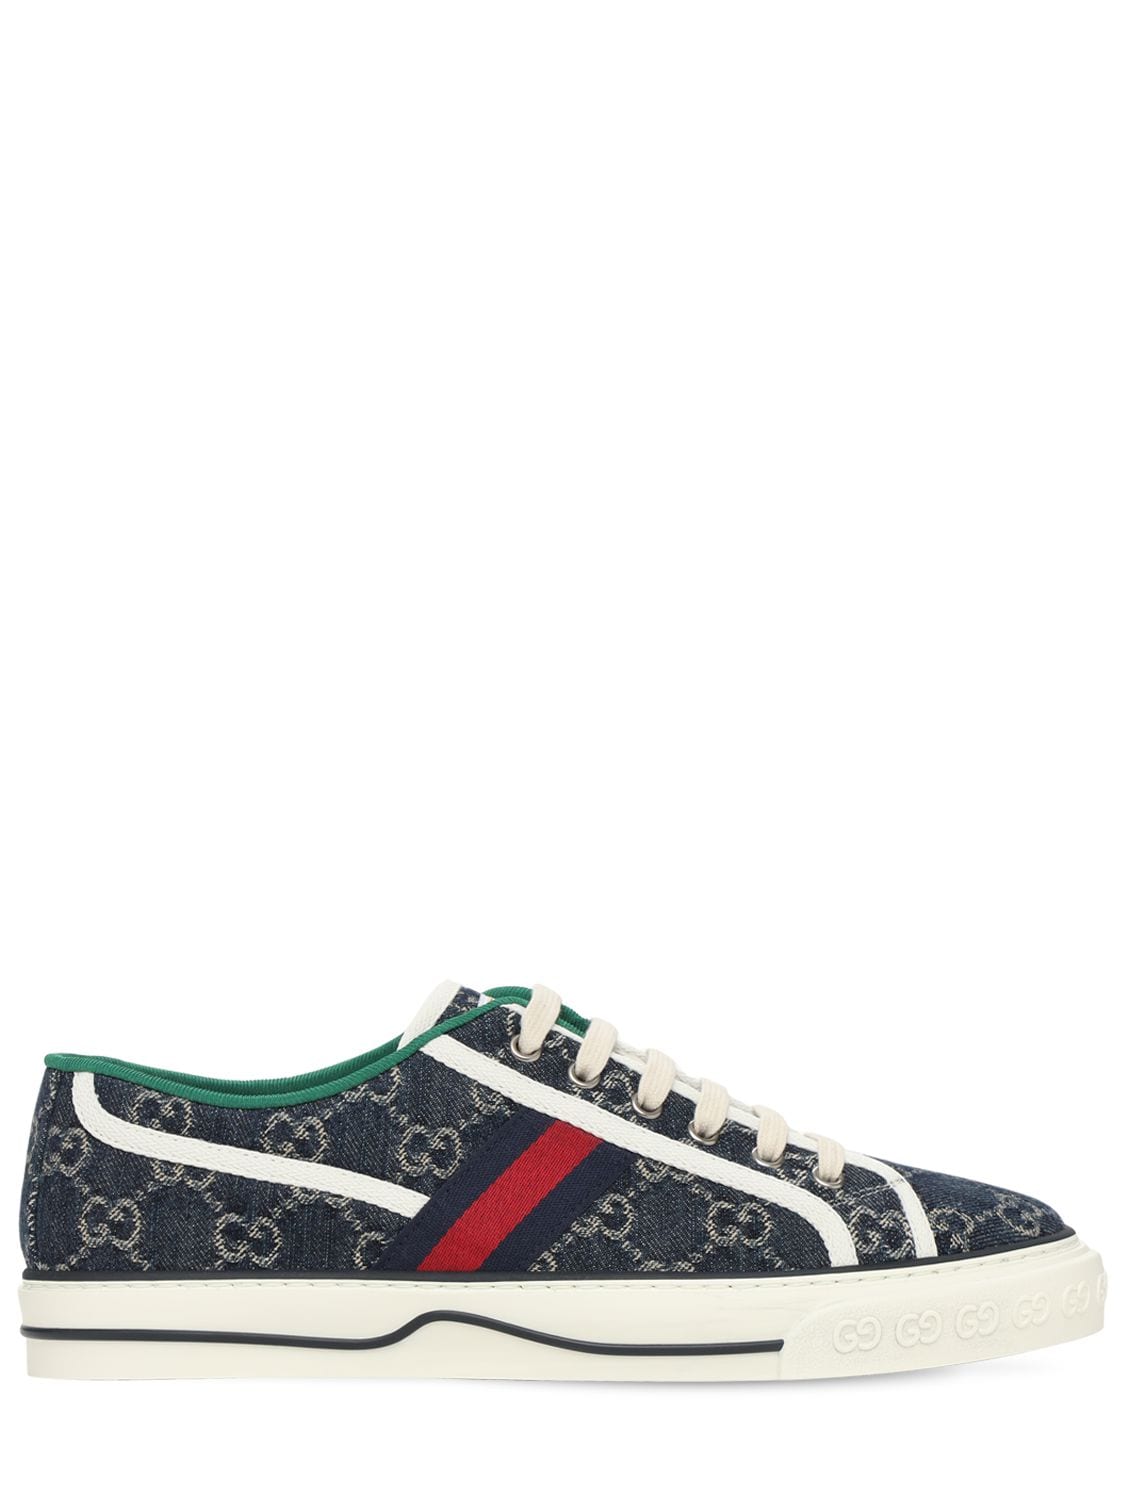 Gucci Tennis 1977 Cotton Sneakers